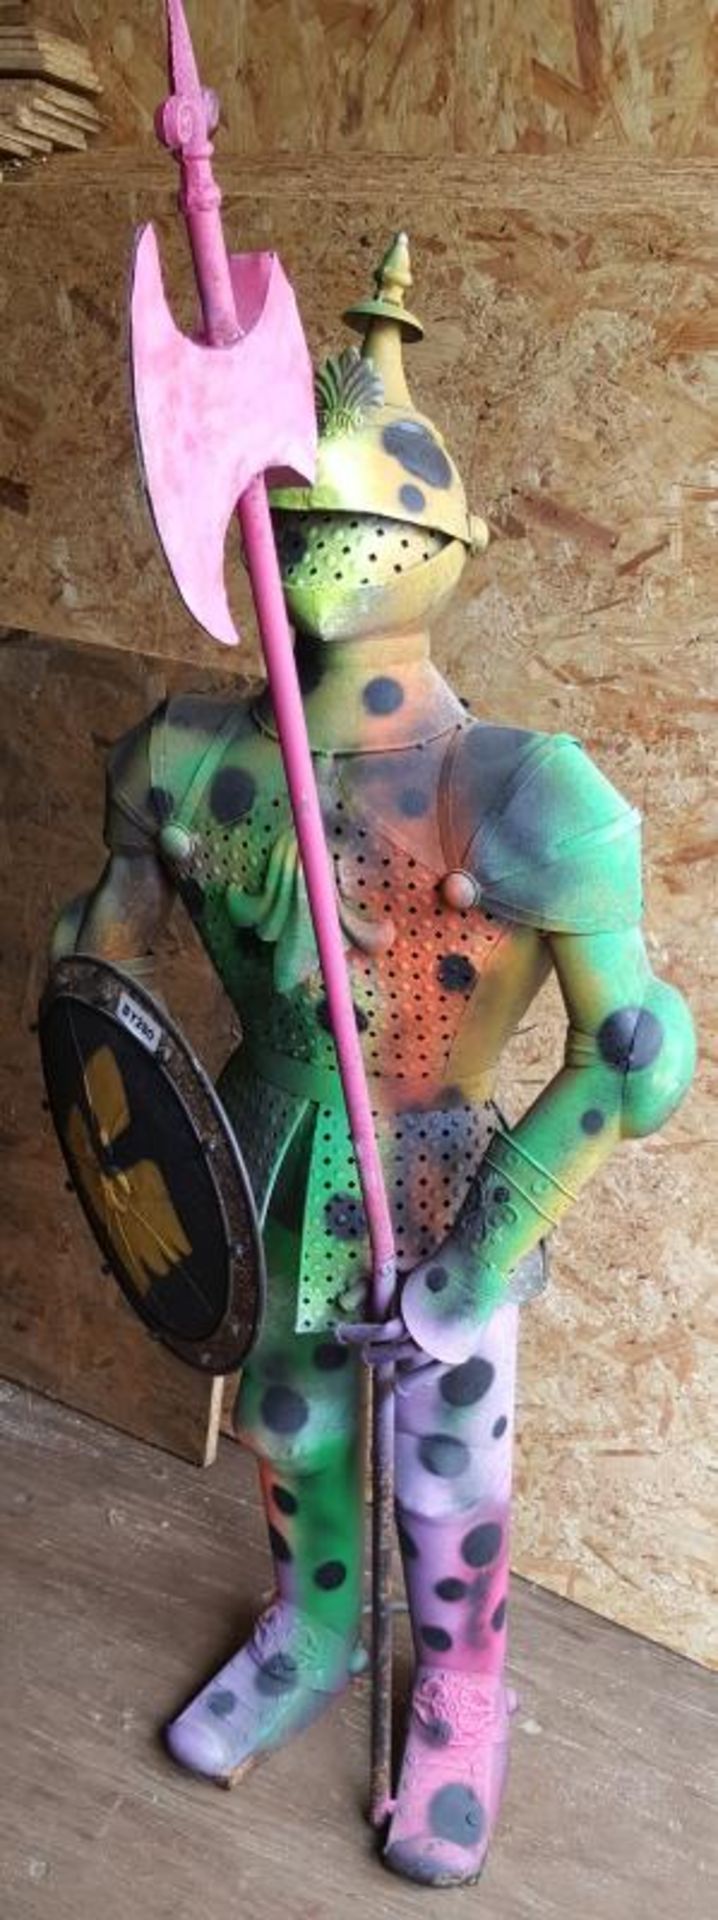 1 x Bespoke Multi Coloured Armored Knight Statue Make Out Of Metal- Ref BY290 - H135/L50/W40cm - CL3 - Image 2 of 4